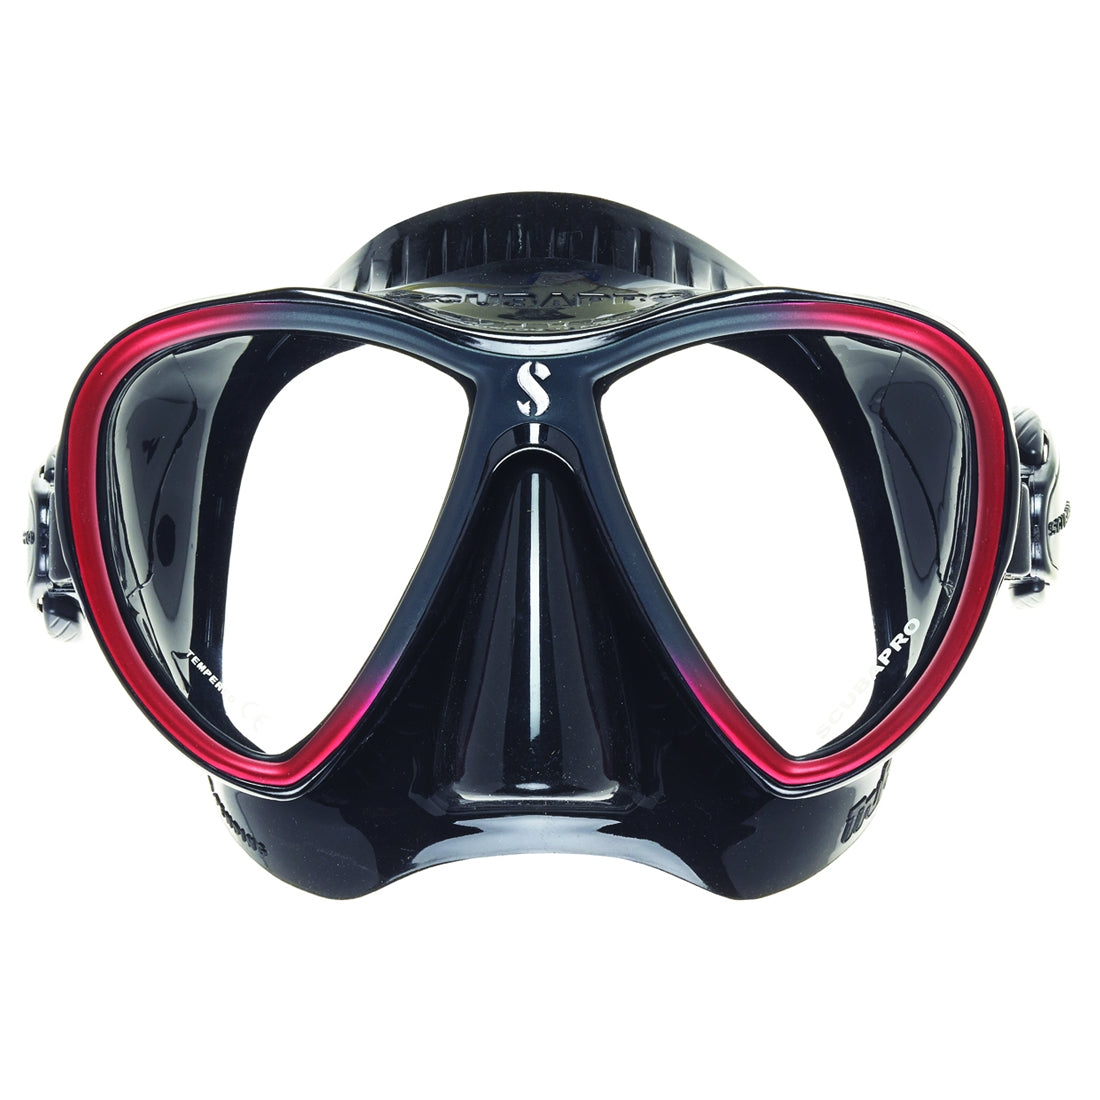 Synergy 2 Mask - Pink